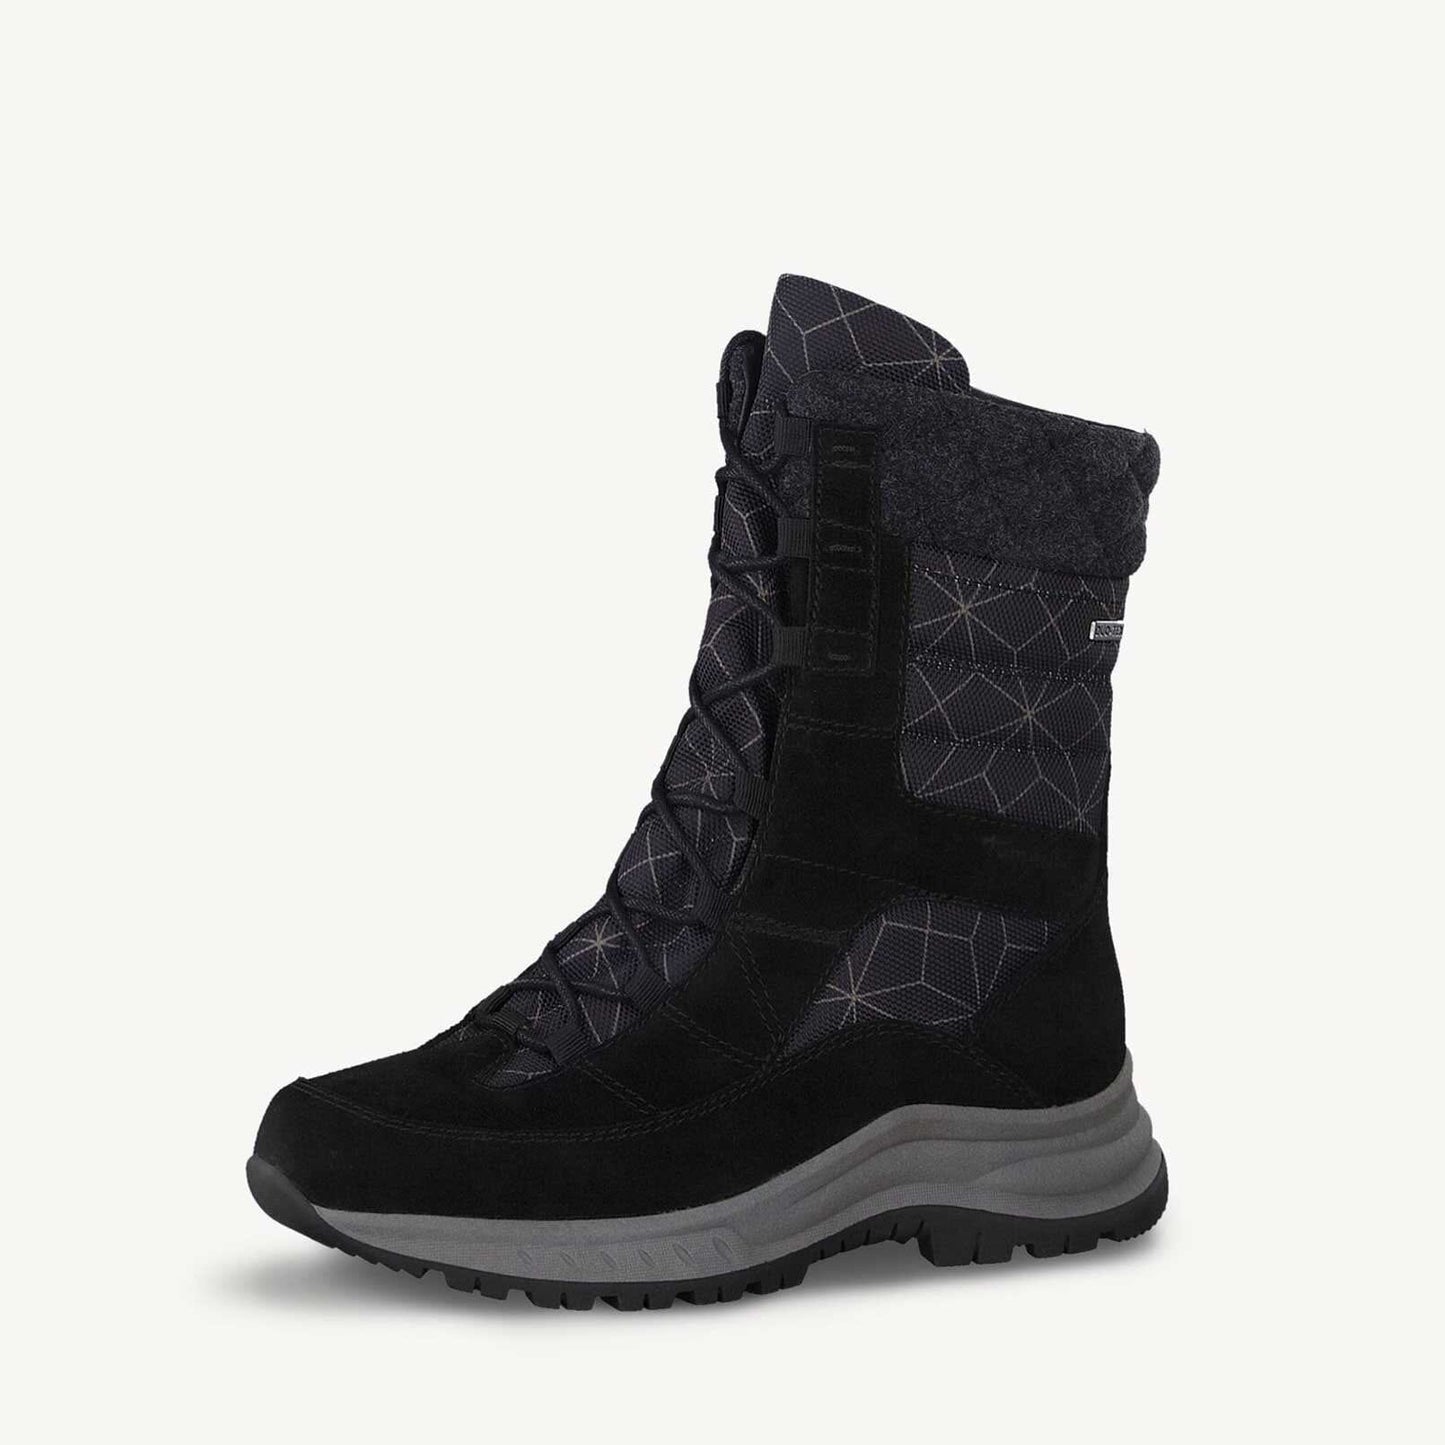 Tamaris Unisex Duotex Warm Lined Snow Boots Unisex Shoes Shafi Pvt. Limited Black EUR 36 